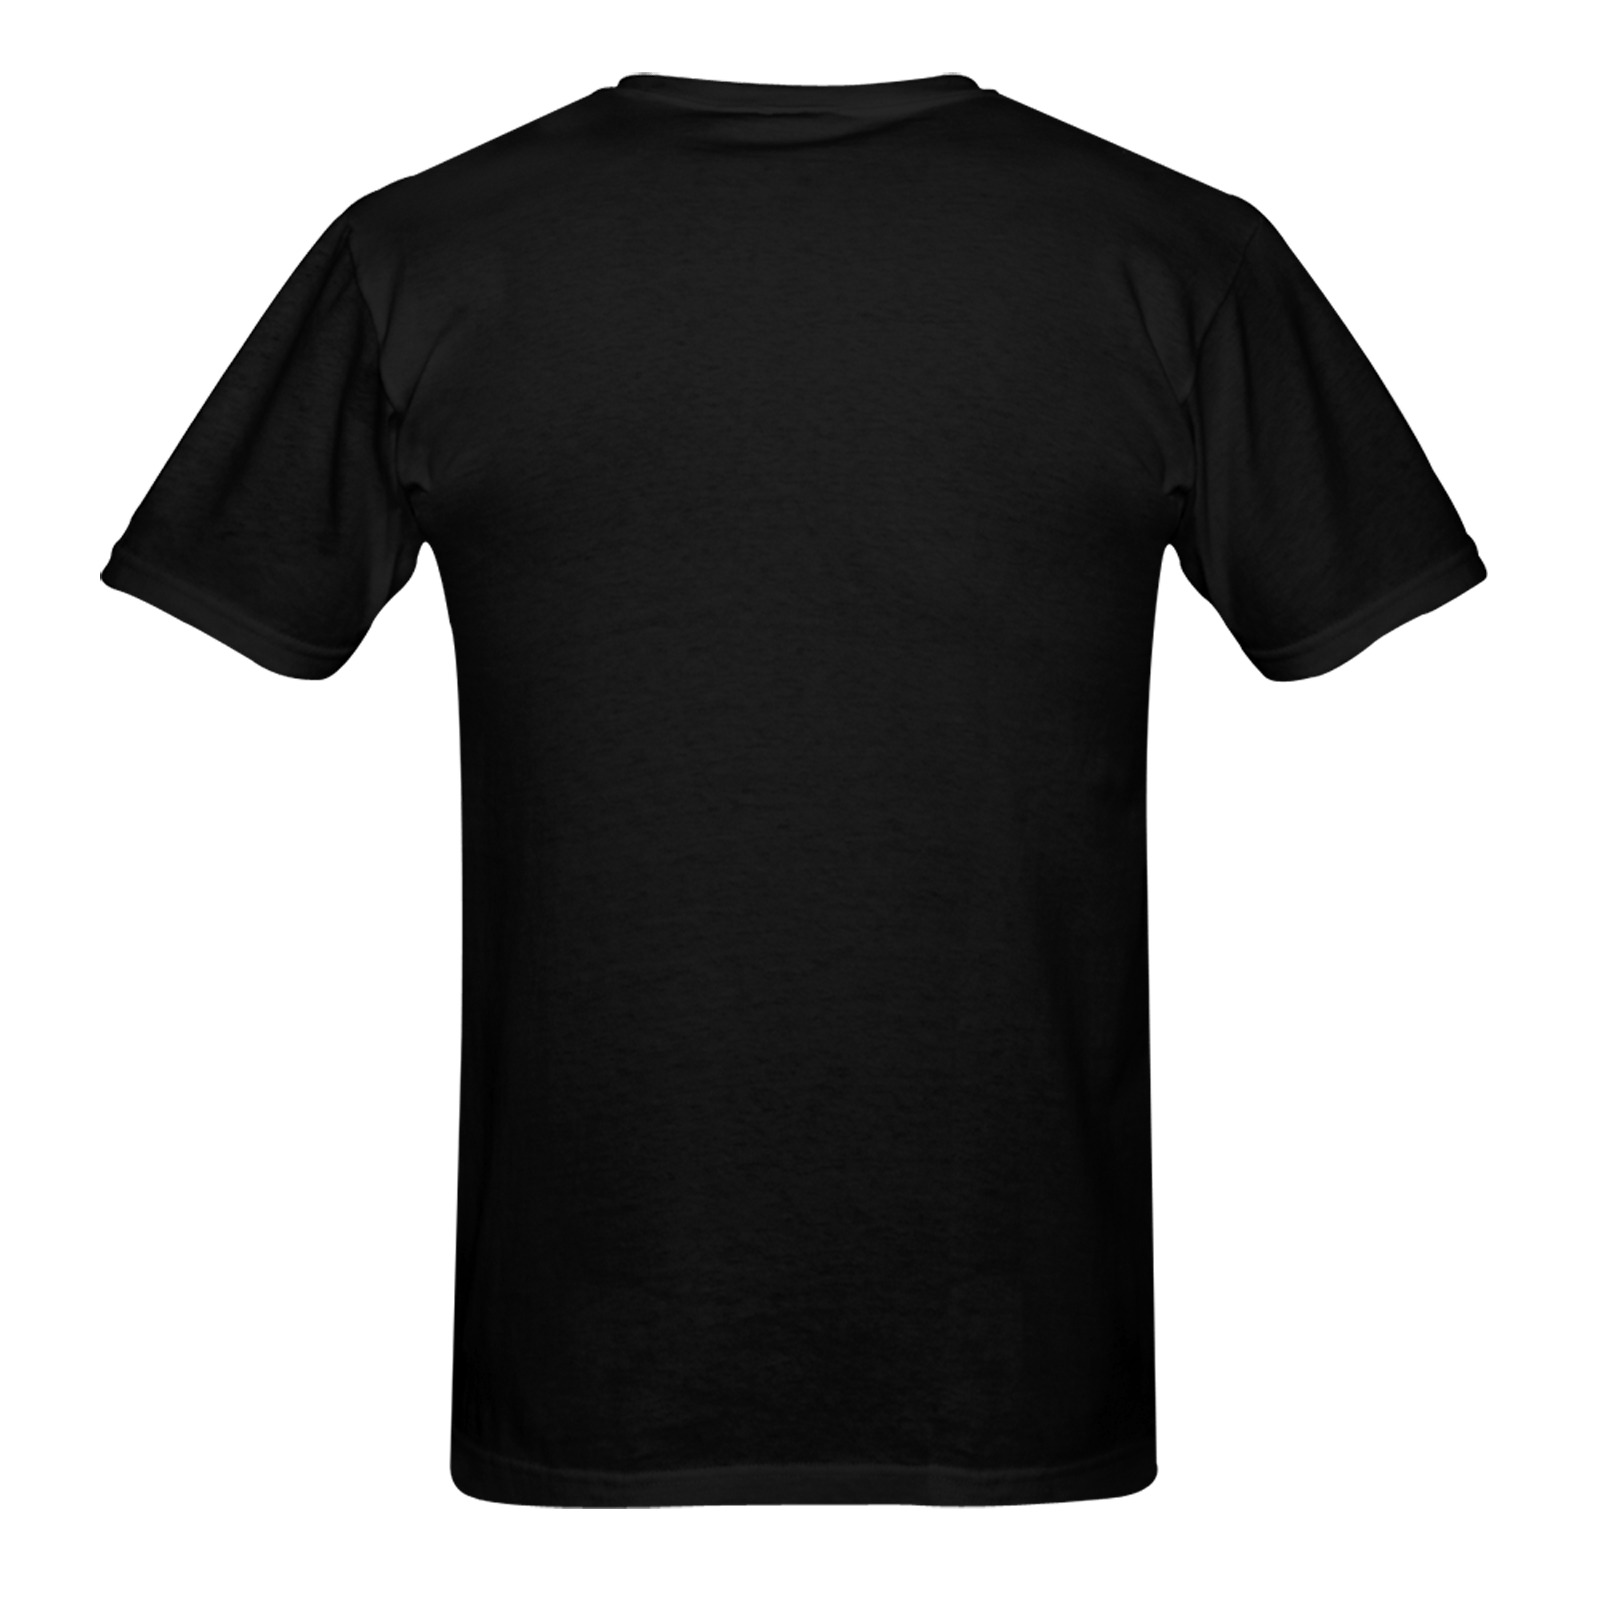 Busy Camping! Men's Heavy Cotton T-Shirt (One Side Printing)